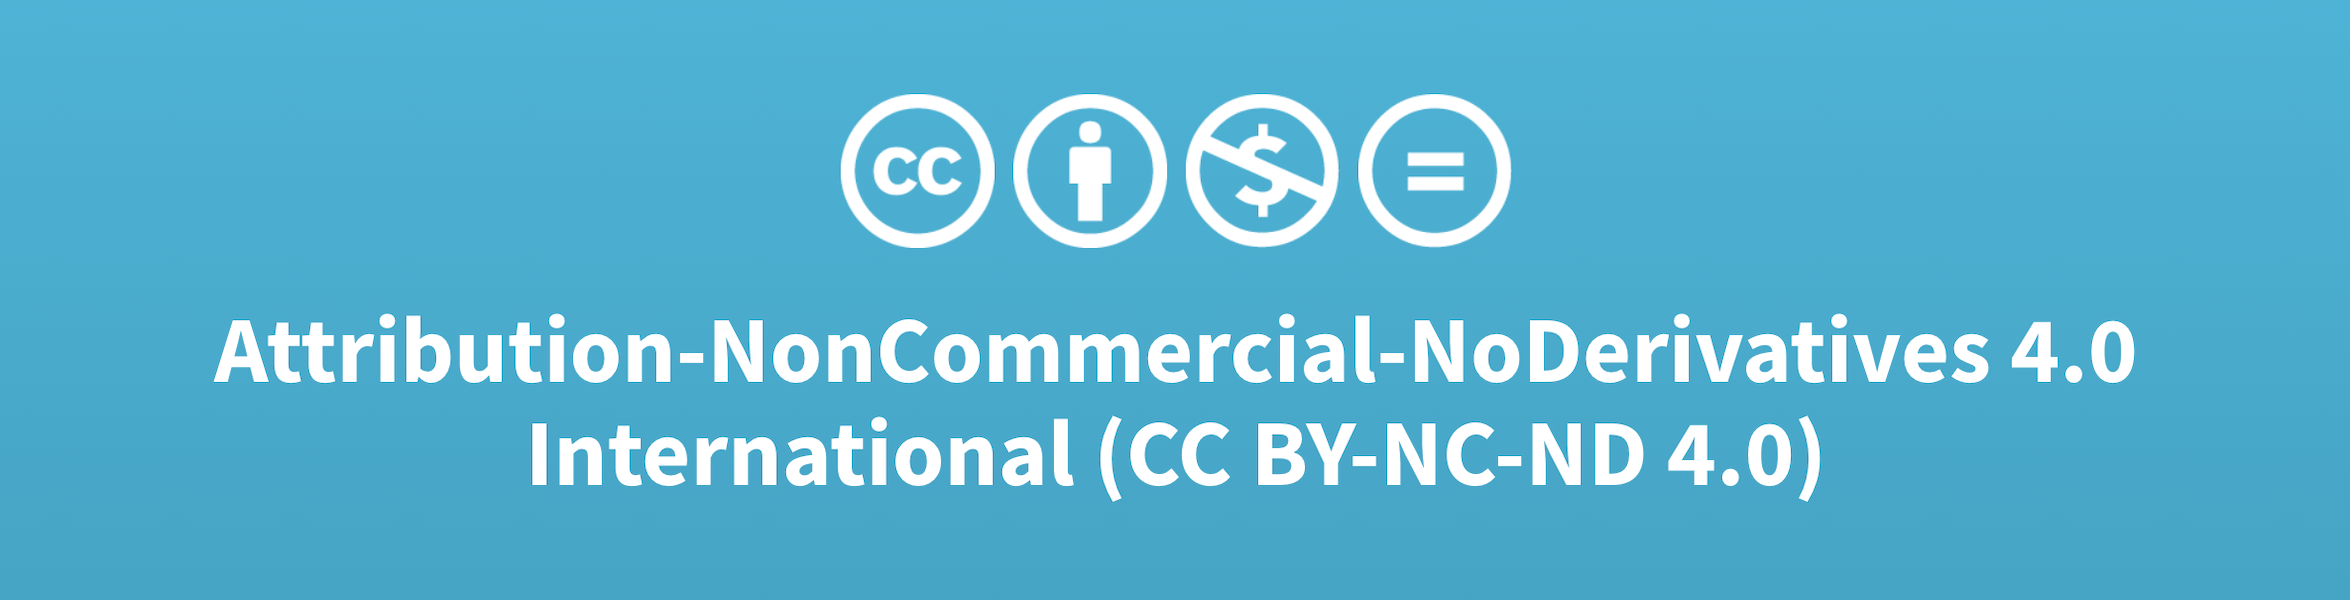 Creative Commons Attribution-NonCommercial-NoDerivatives 4.0 (CC BY-NC-ND 4.0) license